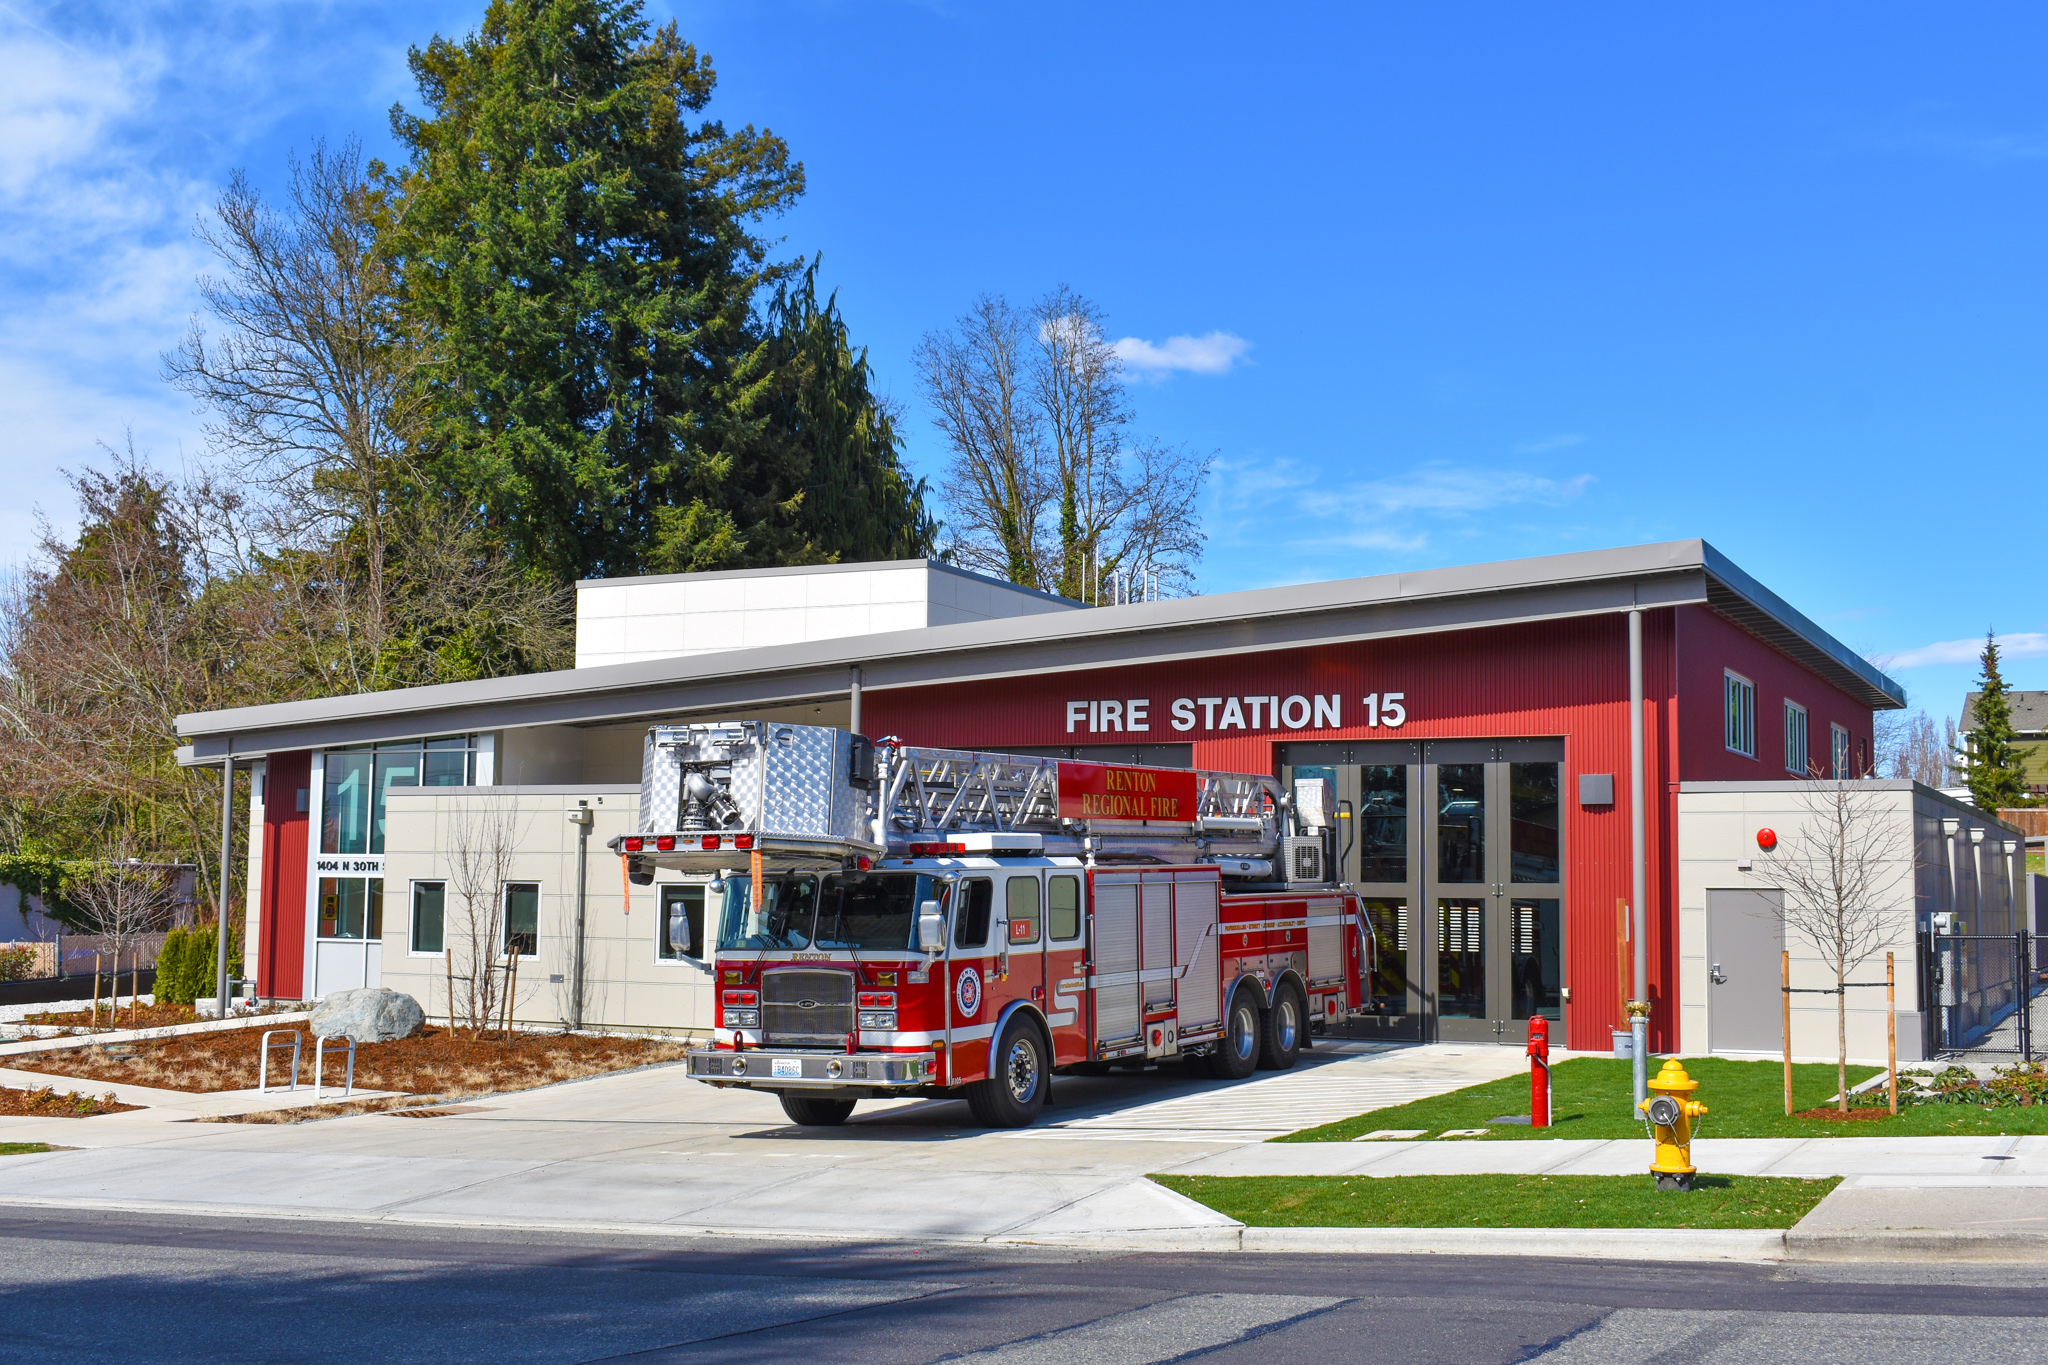 Fire Station 15